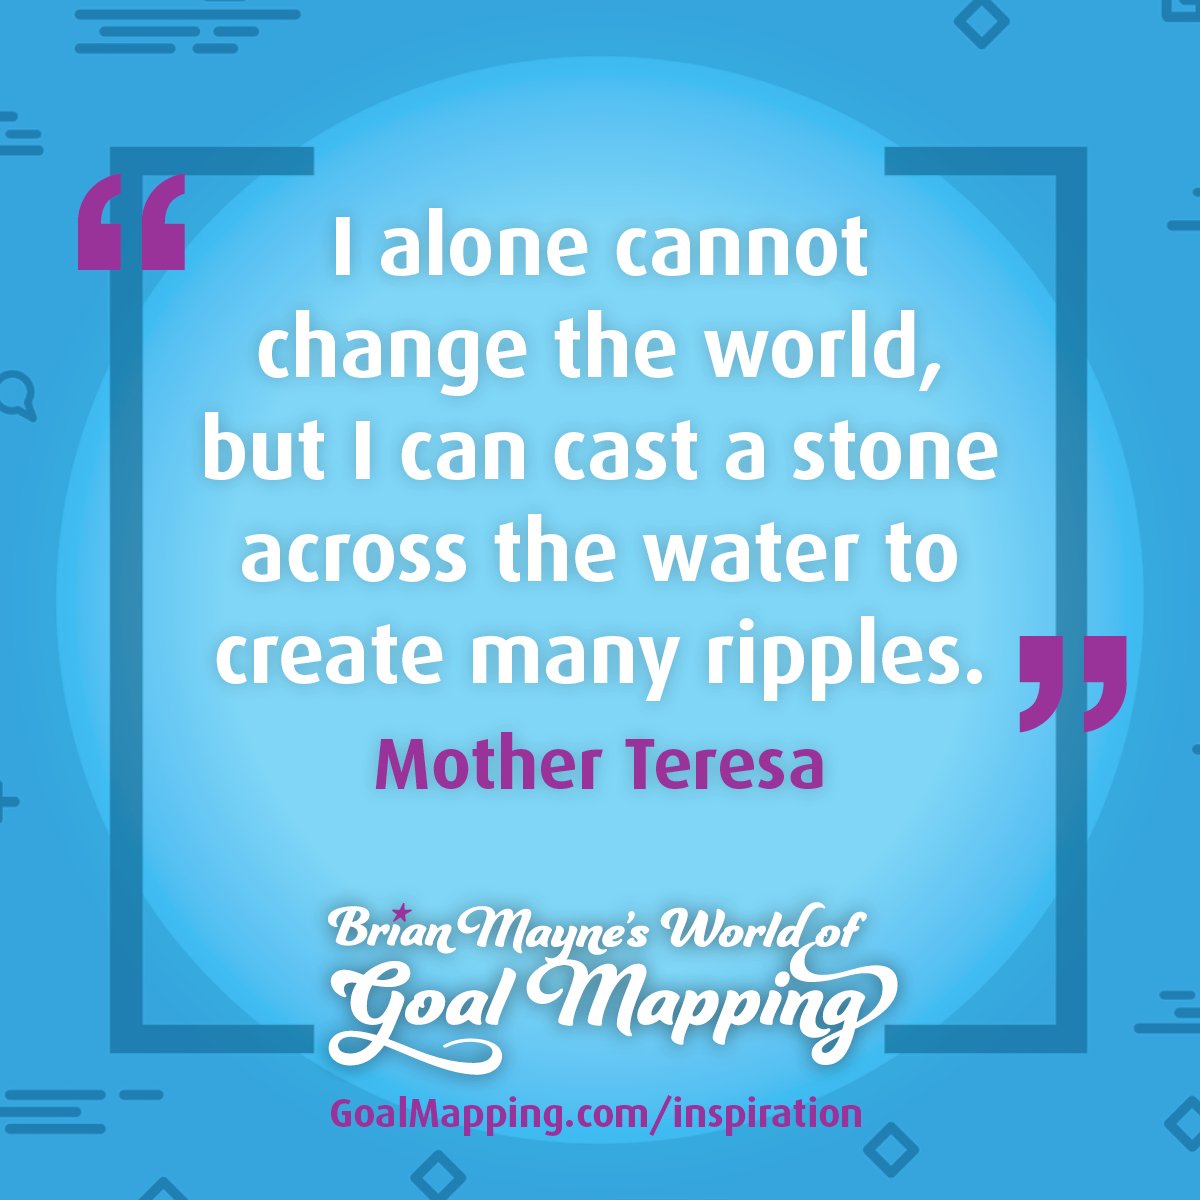 "I alone cannot change the world, but I can cast a stone across the water to create many ripples." Mother Teresa